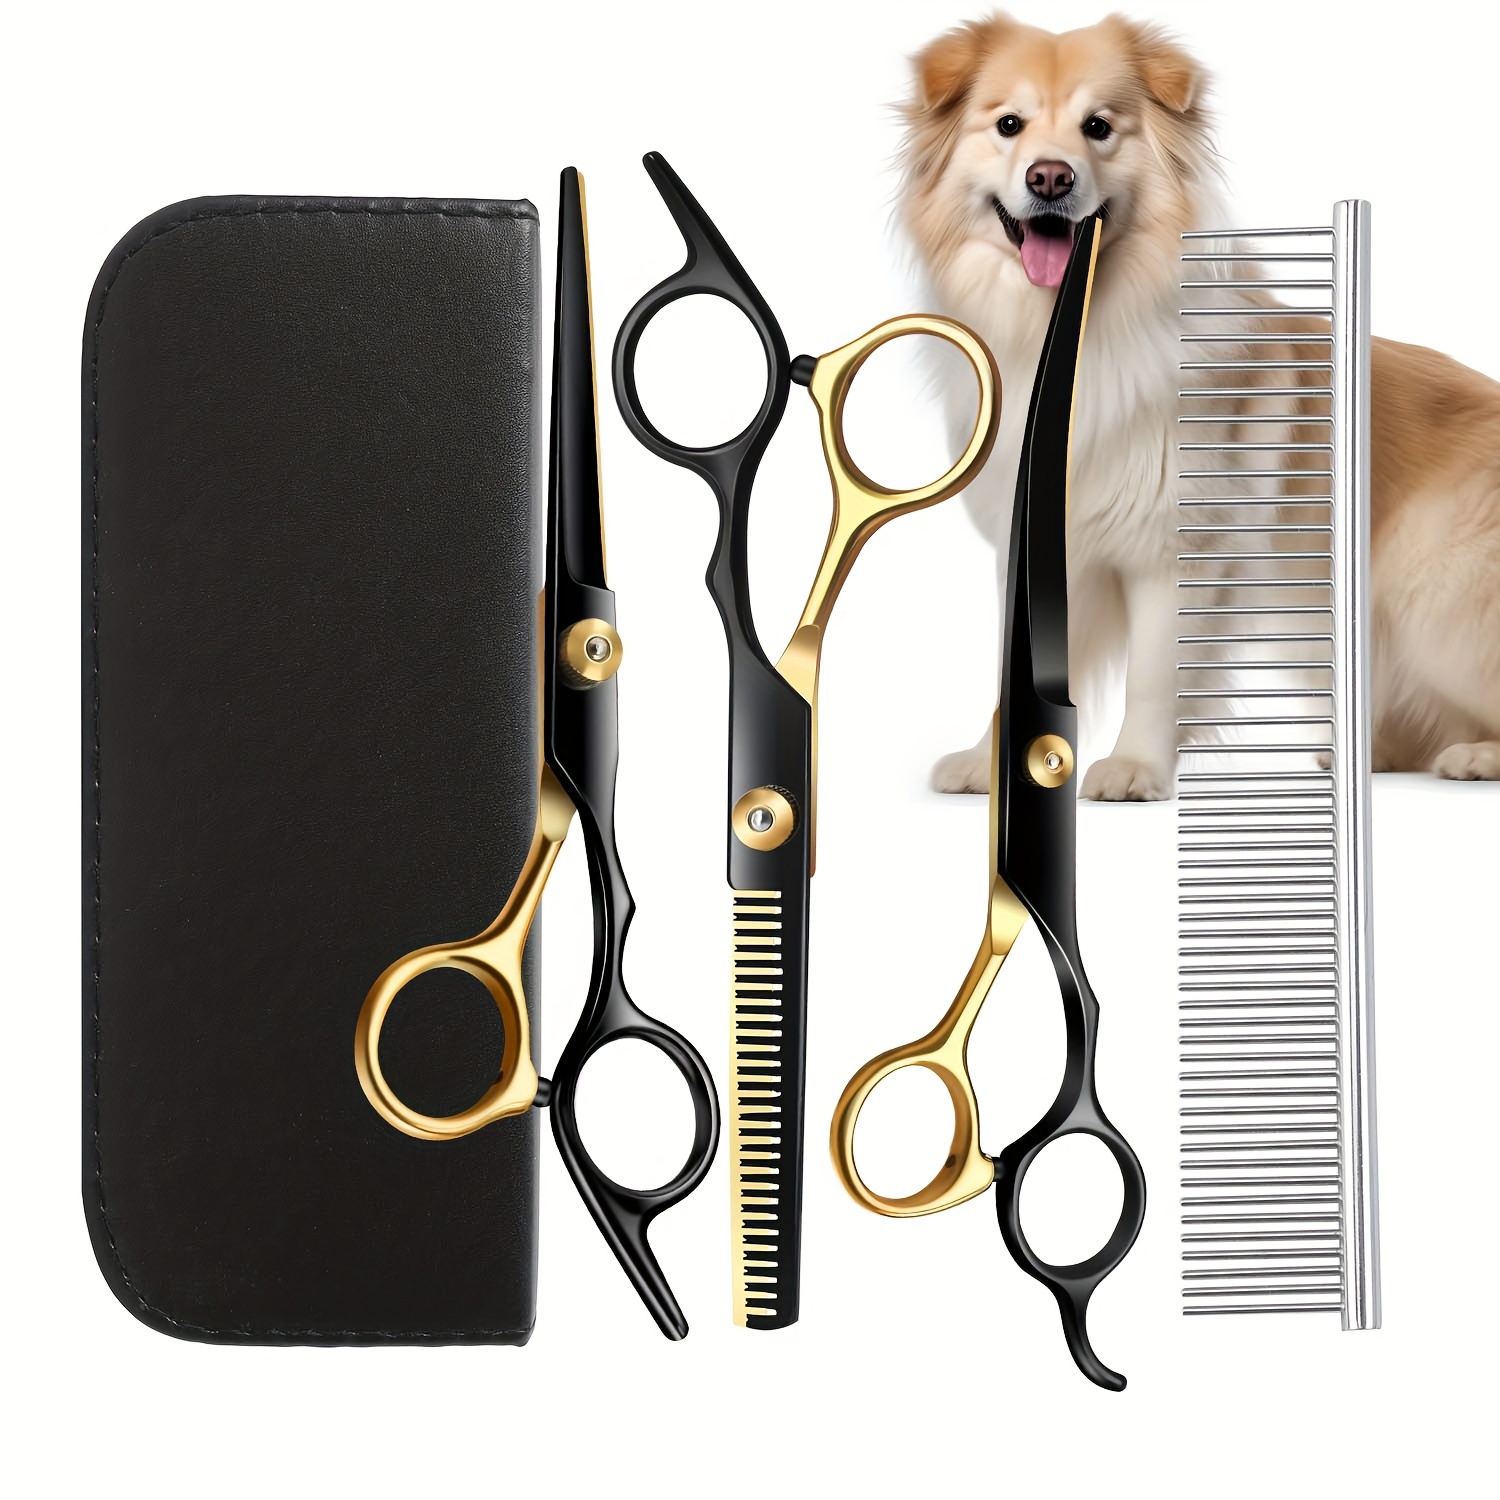 

5pcs Professional Pet Grooming Scissors Set - Flat Tooth And Curling Scissors With Steel Comb And Leather Bag - Perfect For Precise And Safe Trimming, Shaping, And Styling Your Pet's Fur